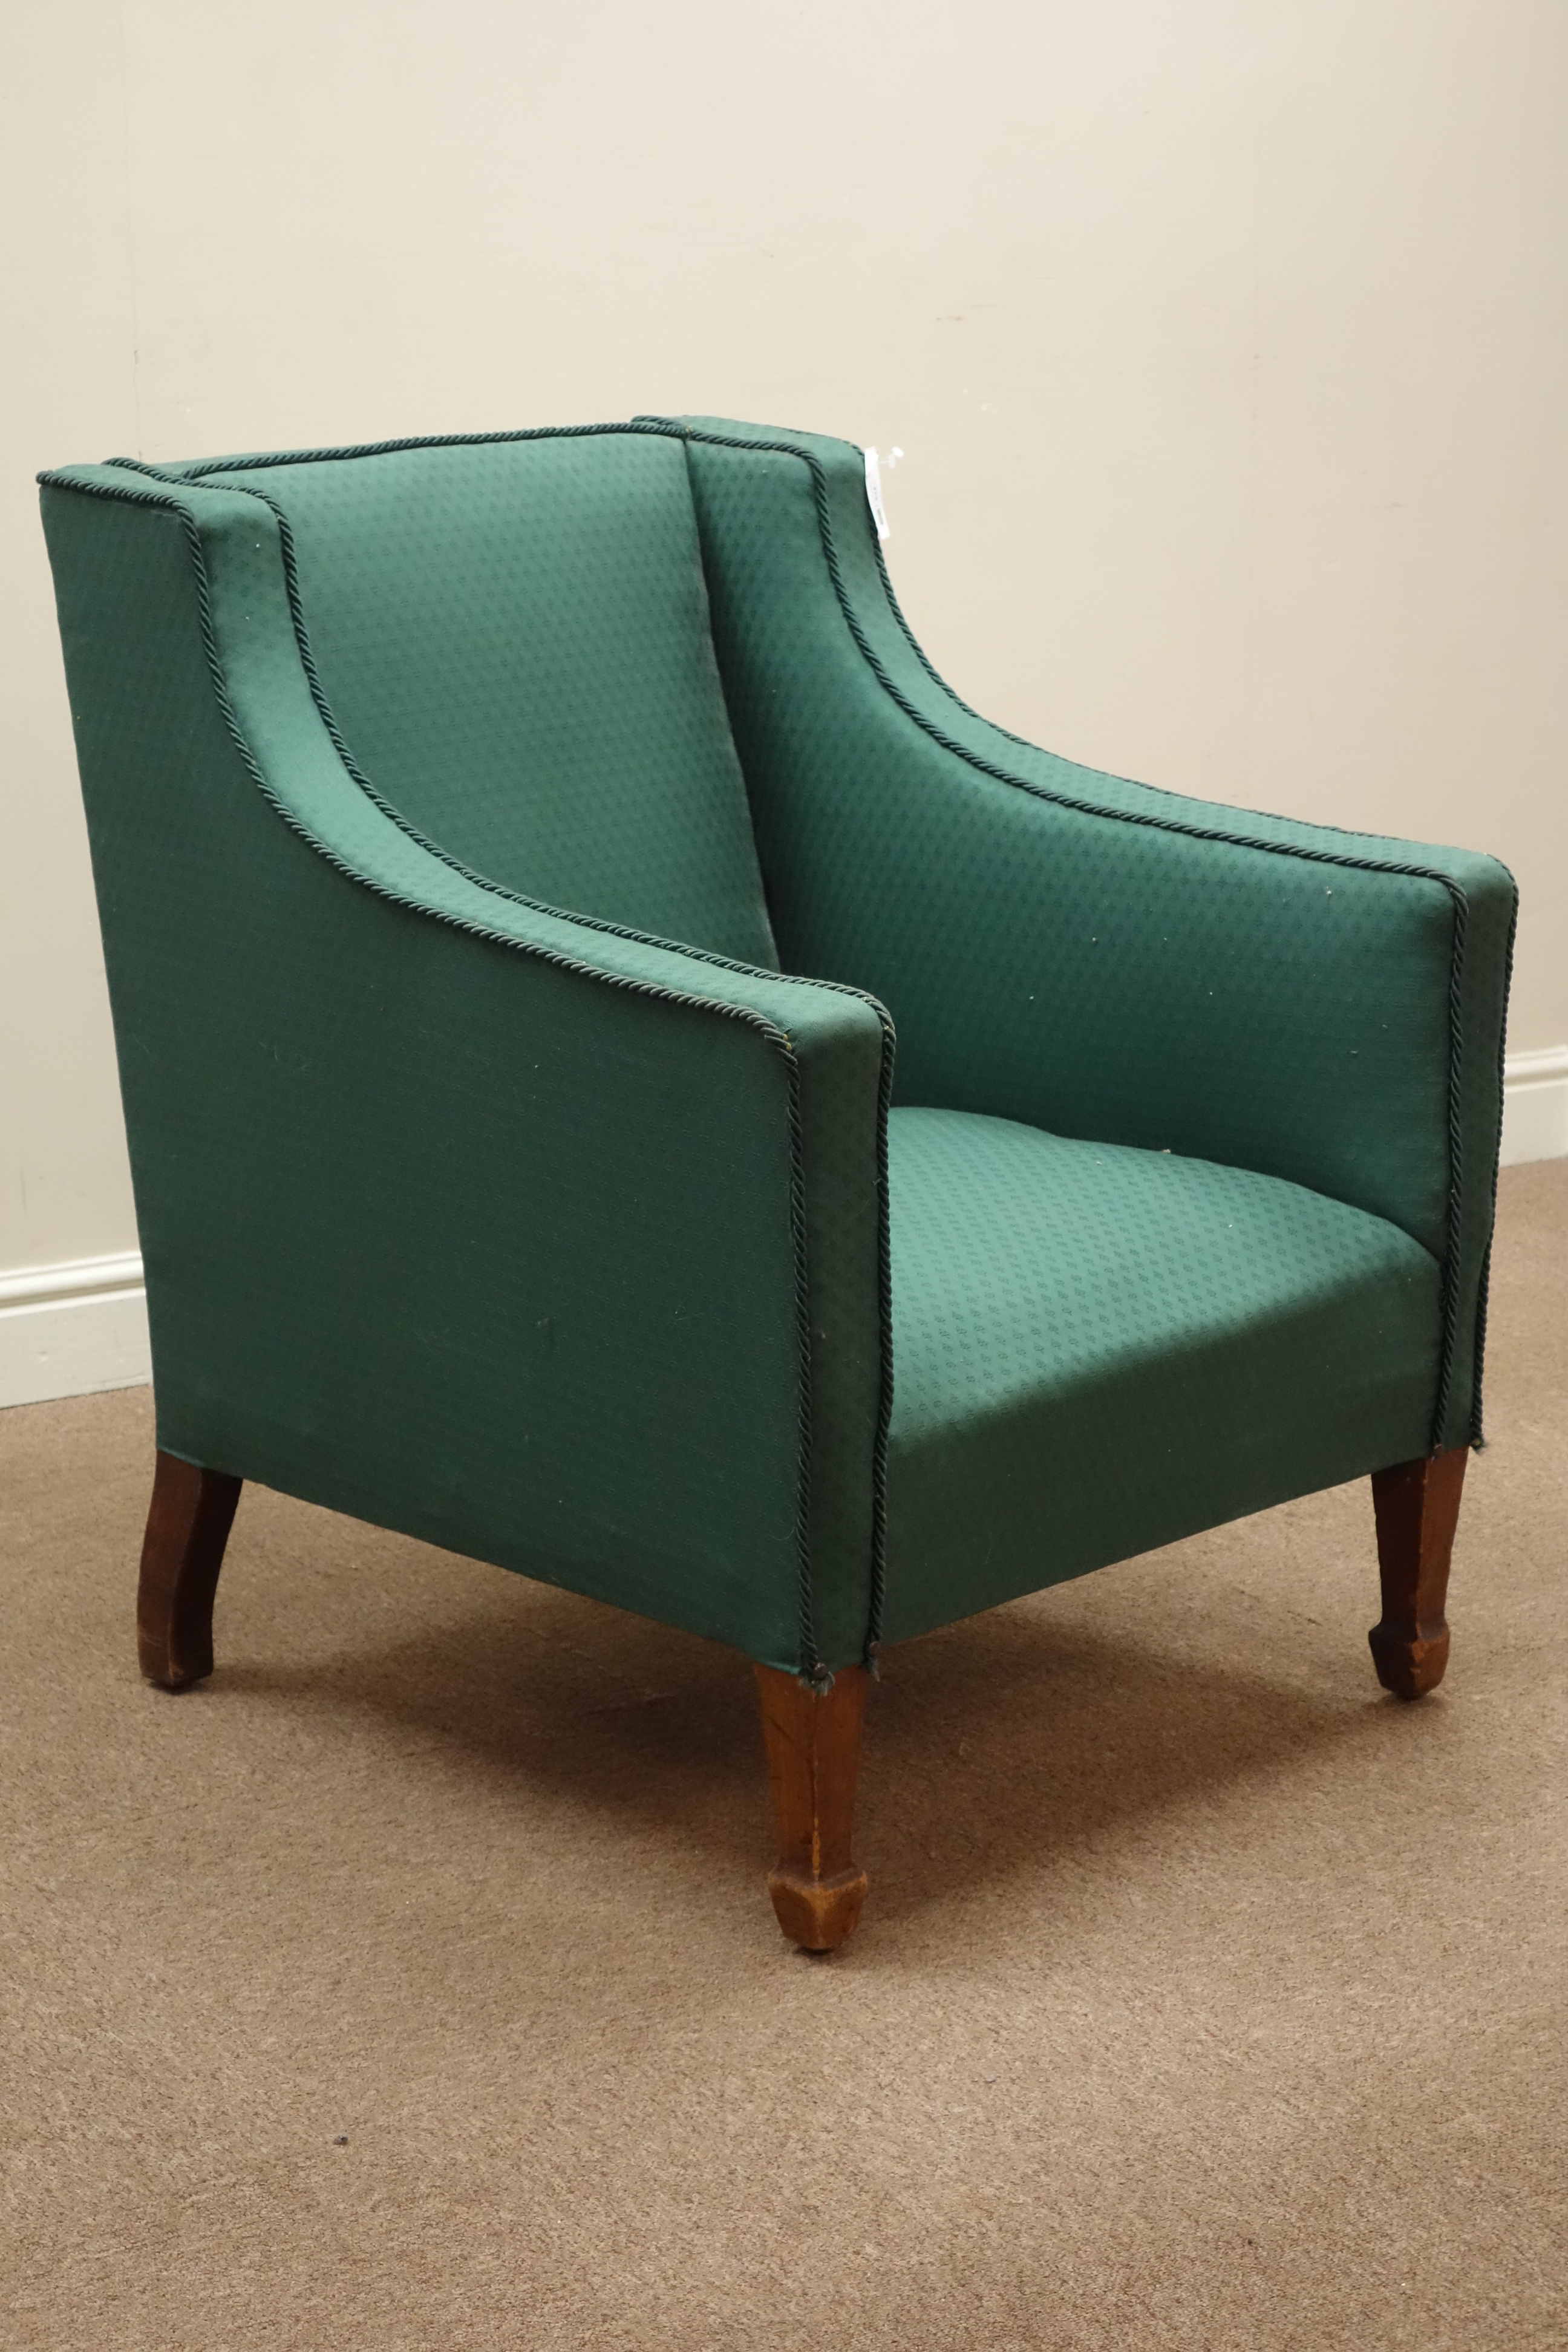 20th century Regency shaped armchair upholstered in green,